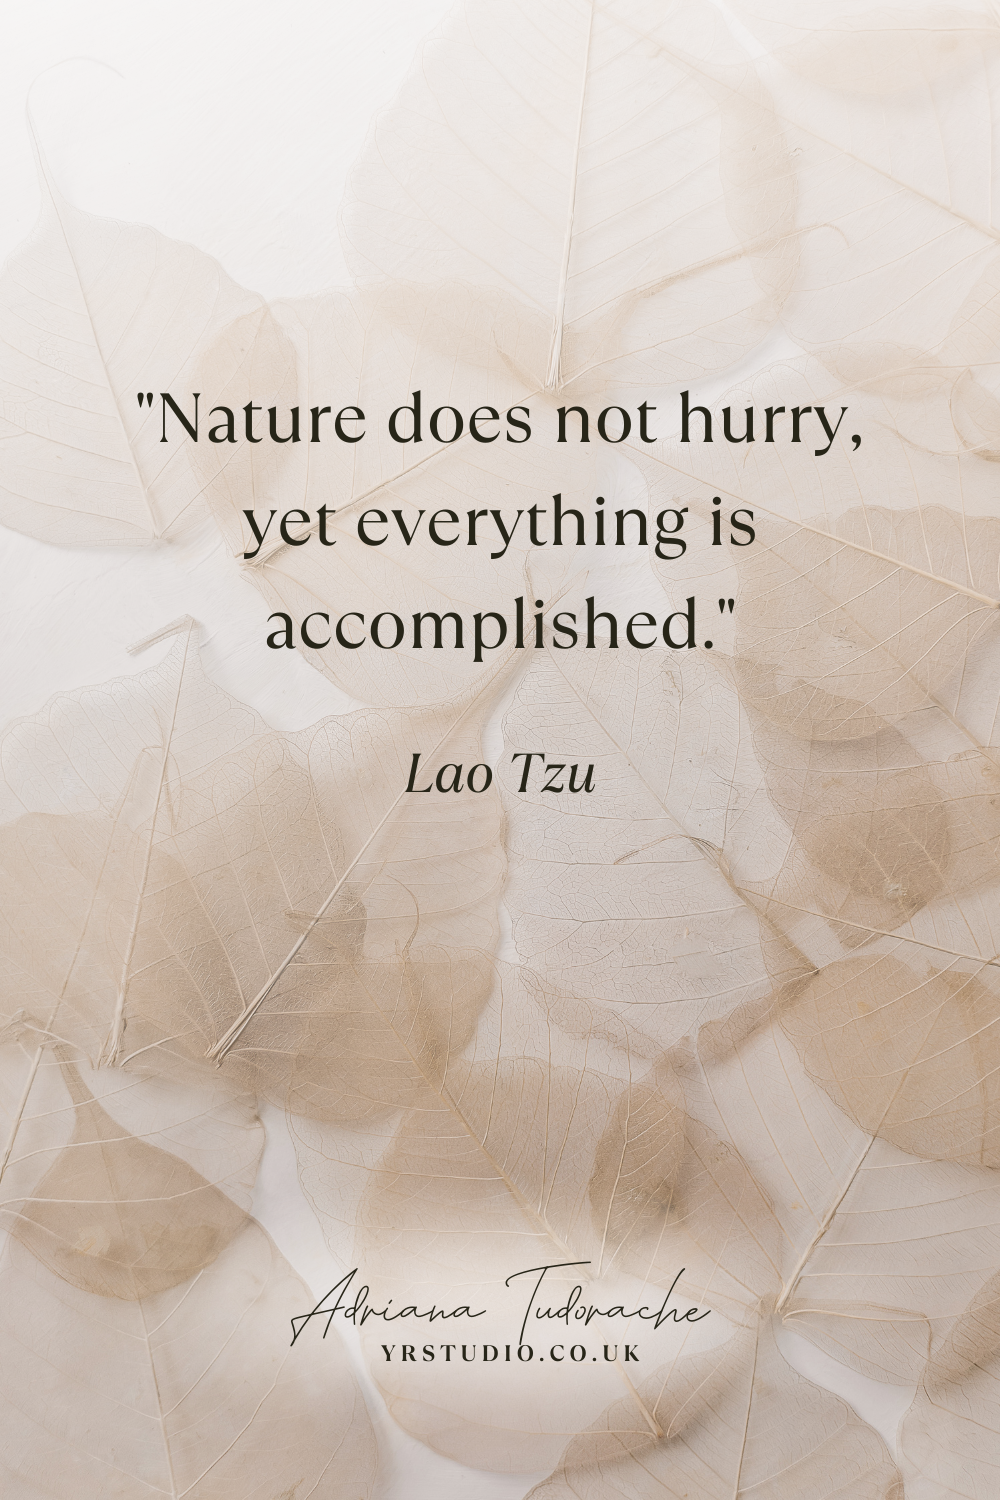 "Nature does not hurry, yet everything is accomplished." - Lao Tzu